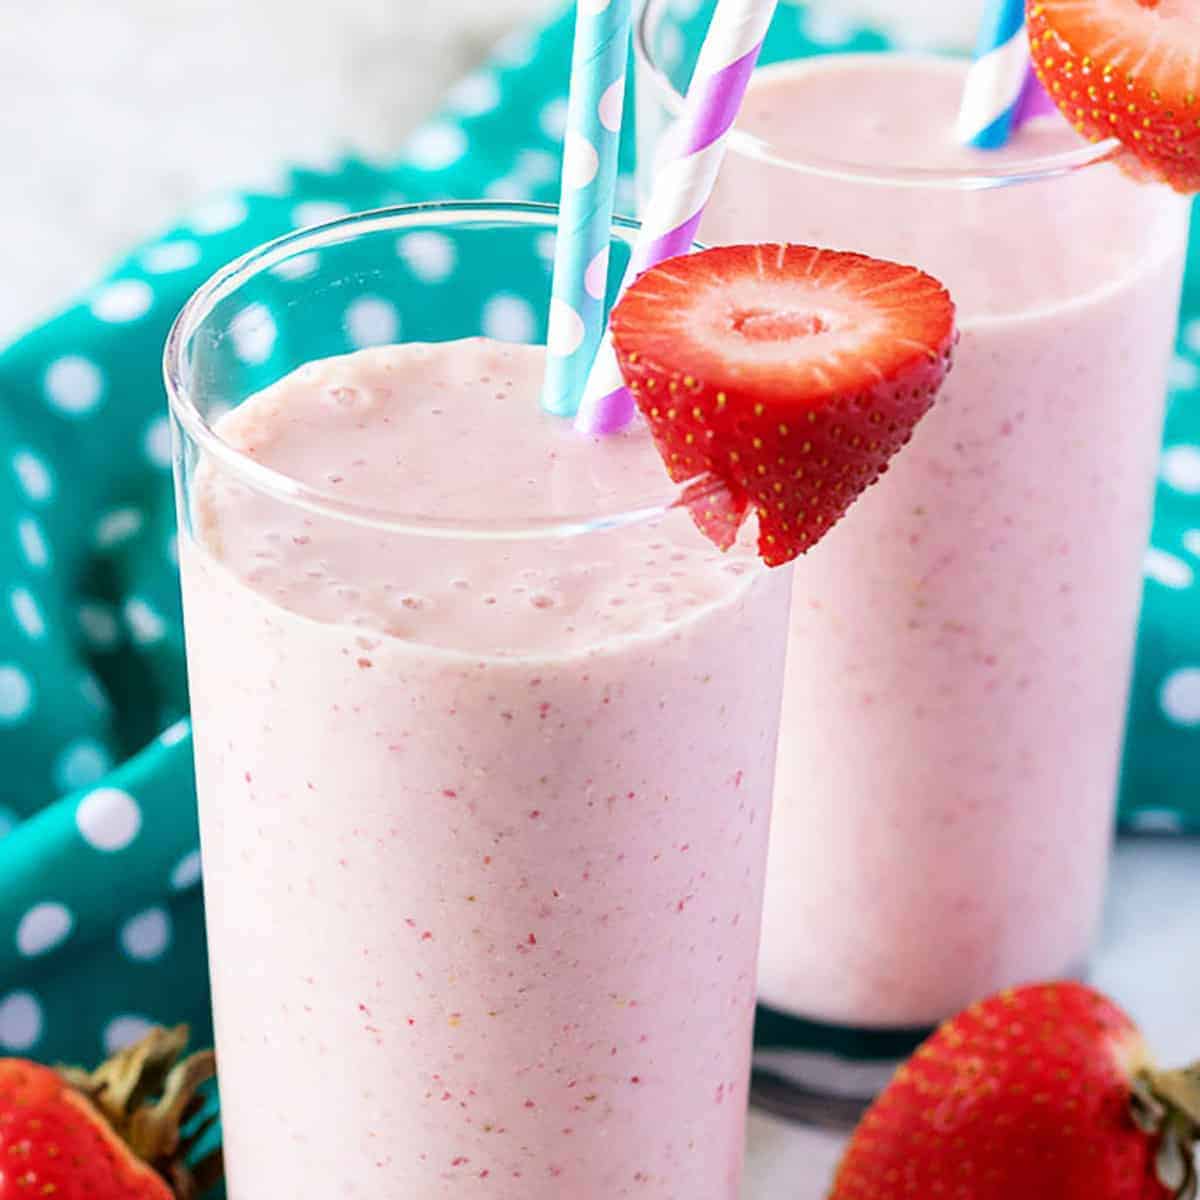 Strawberry banana smoothies in two tall glasses.